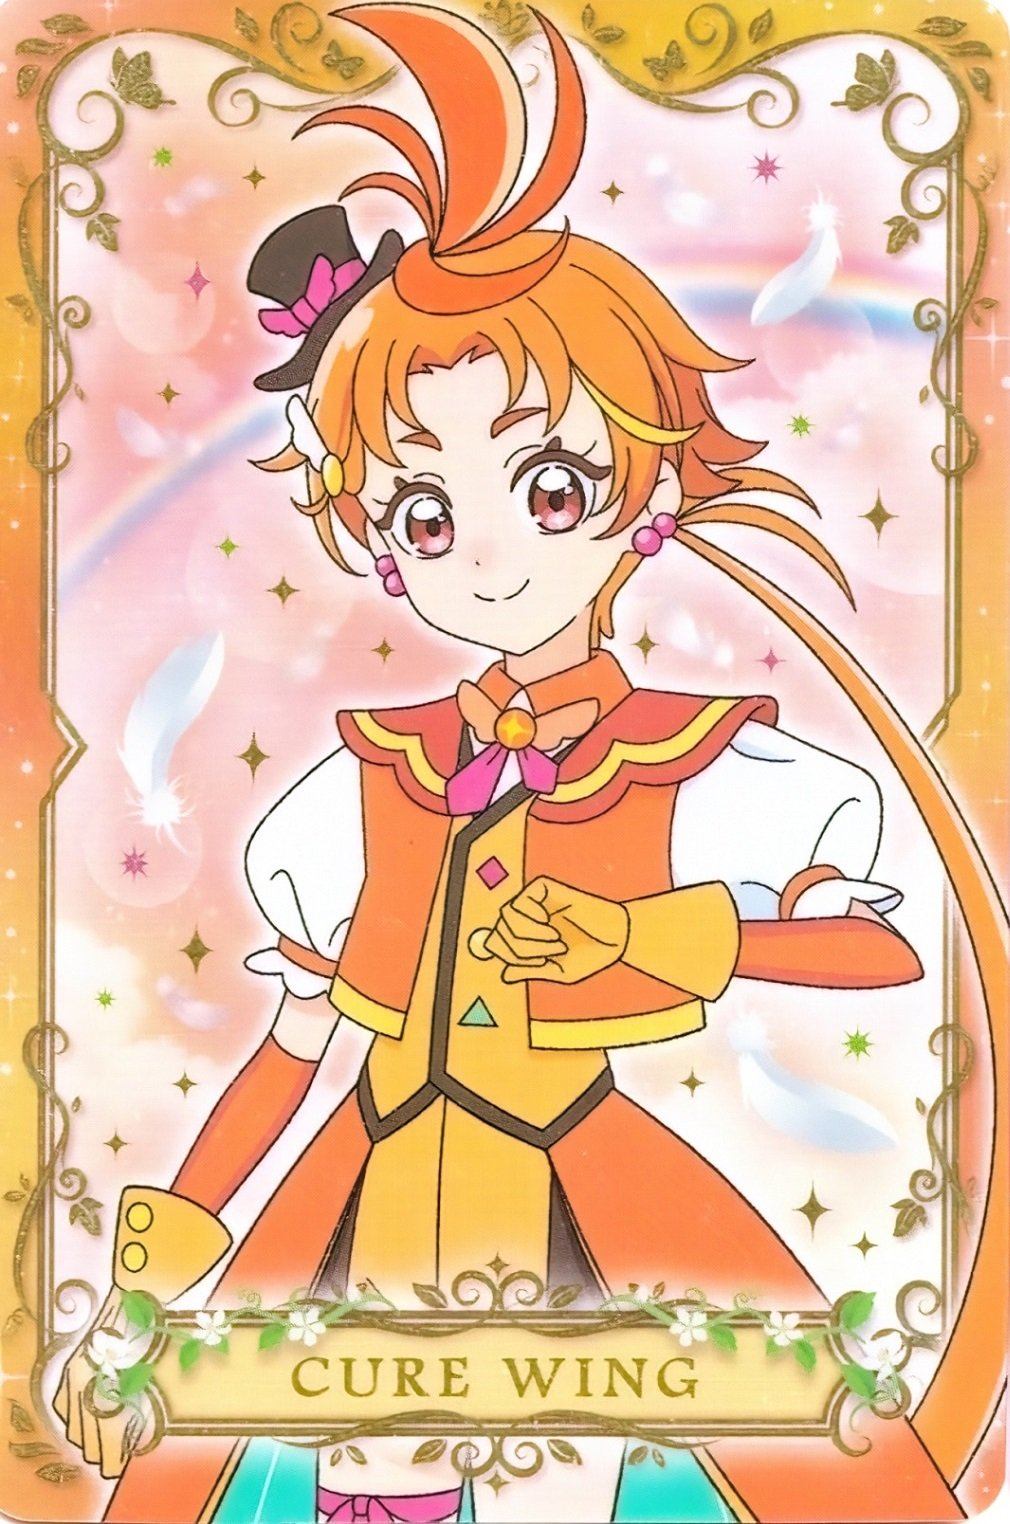 Eriol Irzahn on X: Hirogaru Sky Precure ☁️ With the presence of Majesty,  the Hirogaru Sky group will grow to stick to its principles and become a  strong team with a heroic